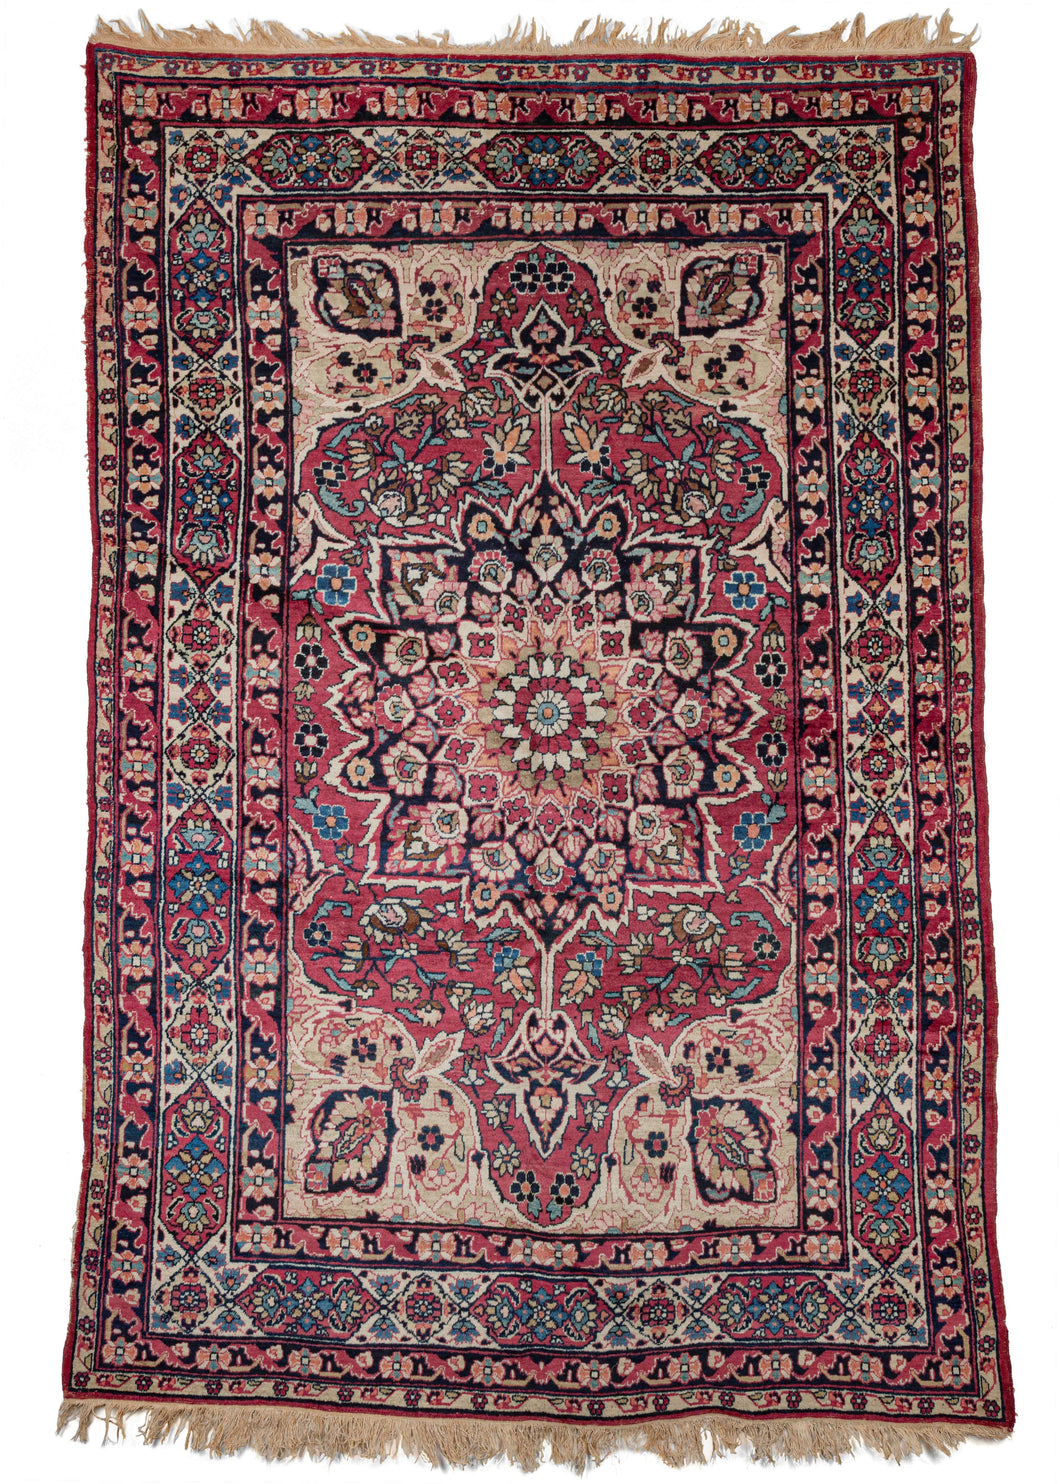 Antique Persian Lavar Kerman rug featuring a central medallion with a curvilinear floral design and scalloped cornices. The field is a rich raspberry color, nicely contrasted by the lighter pinks and creams of the cornices. The minor borders are composed of vine and leaf motifs, while the main border contains alternating blossoms in diamonds and cartouches. 